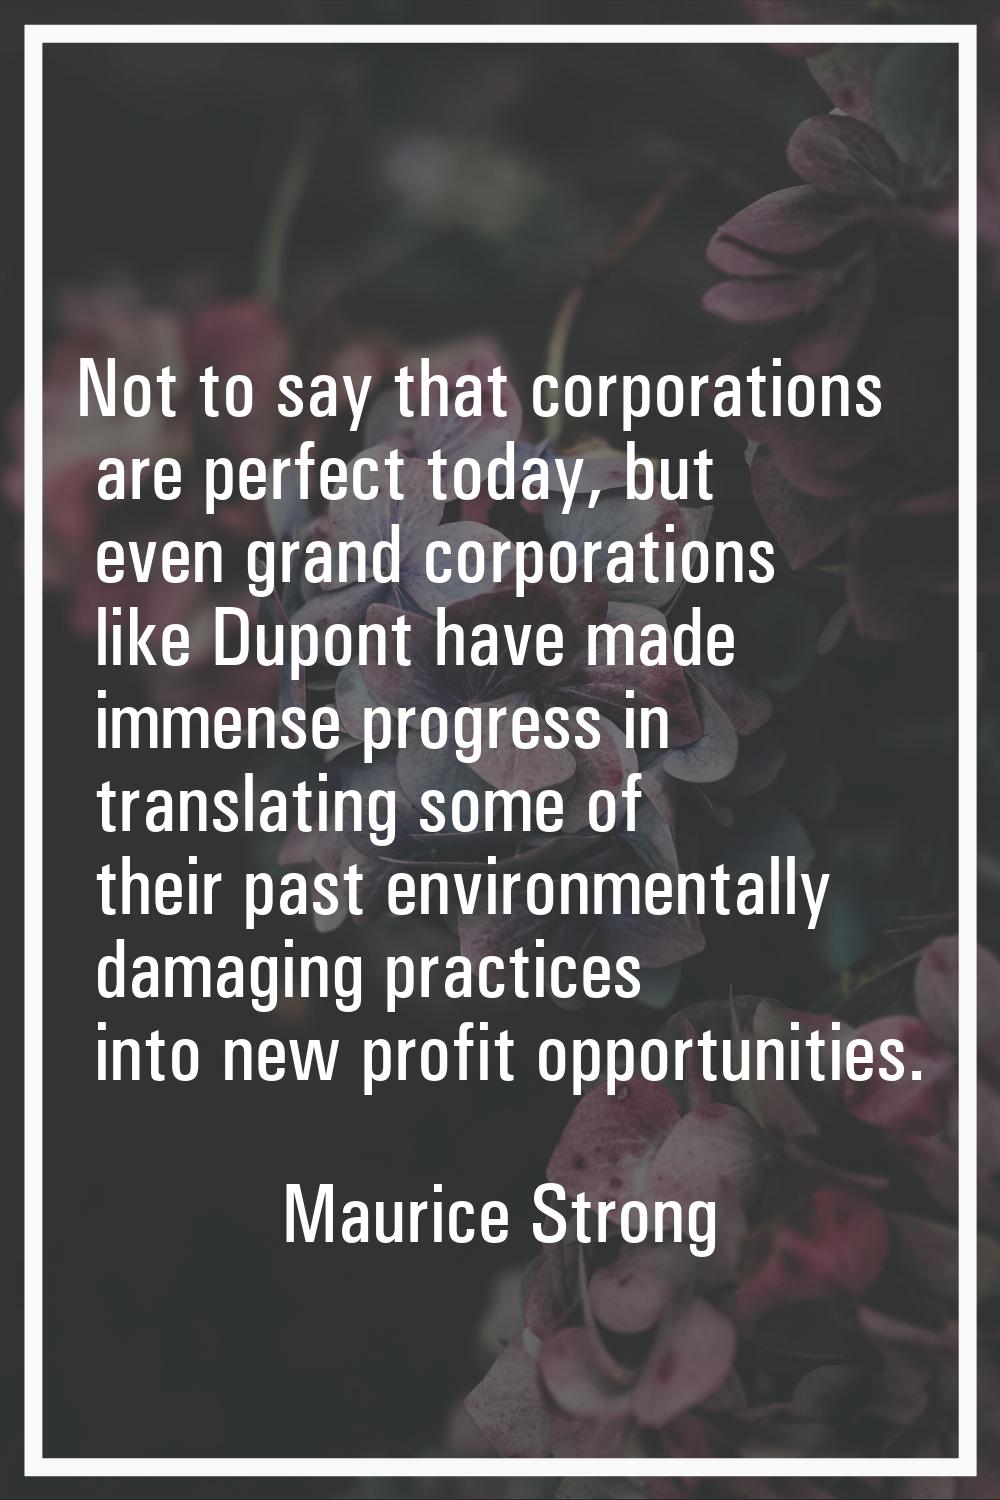 Not to say that corporations are perfect today, but even grand corporations like Dupont have made i